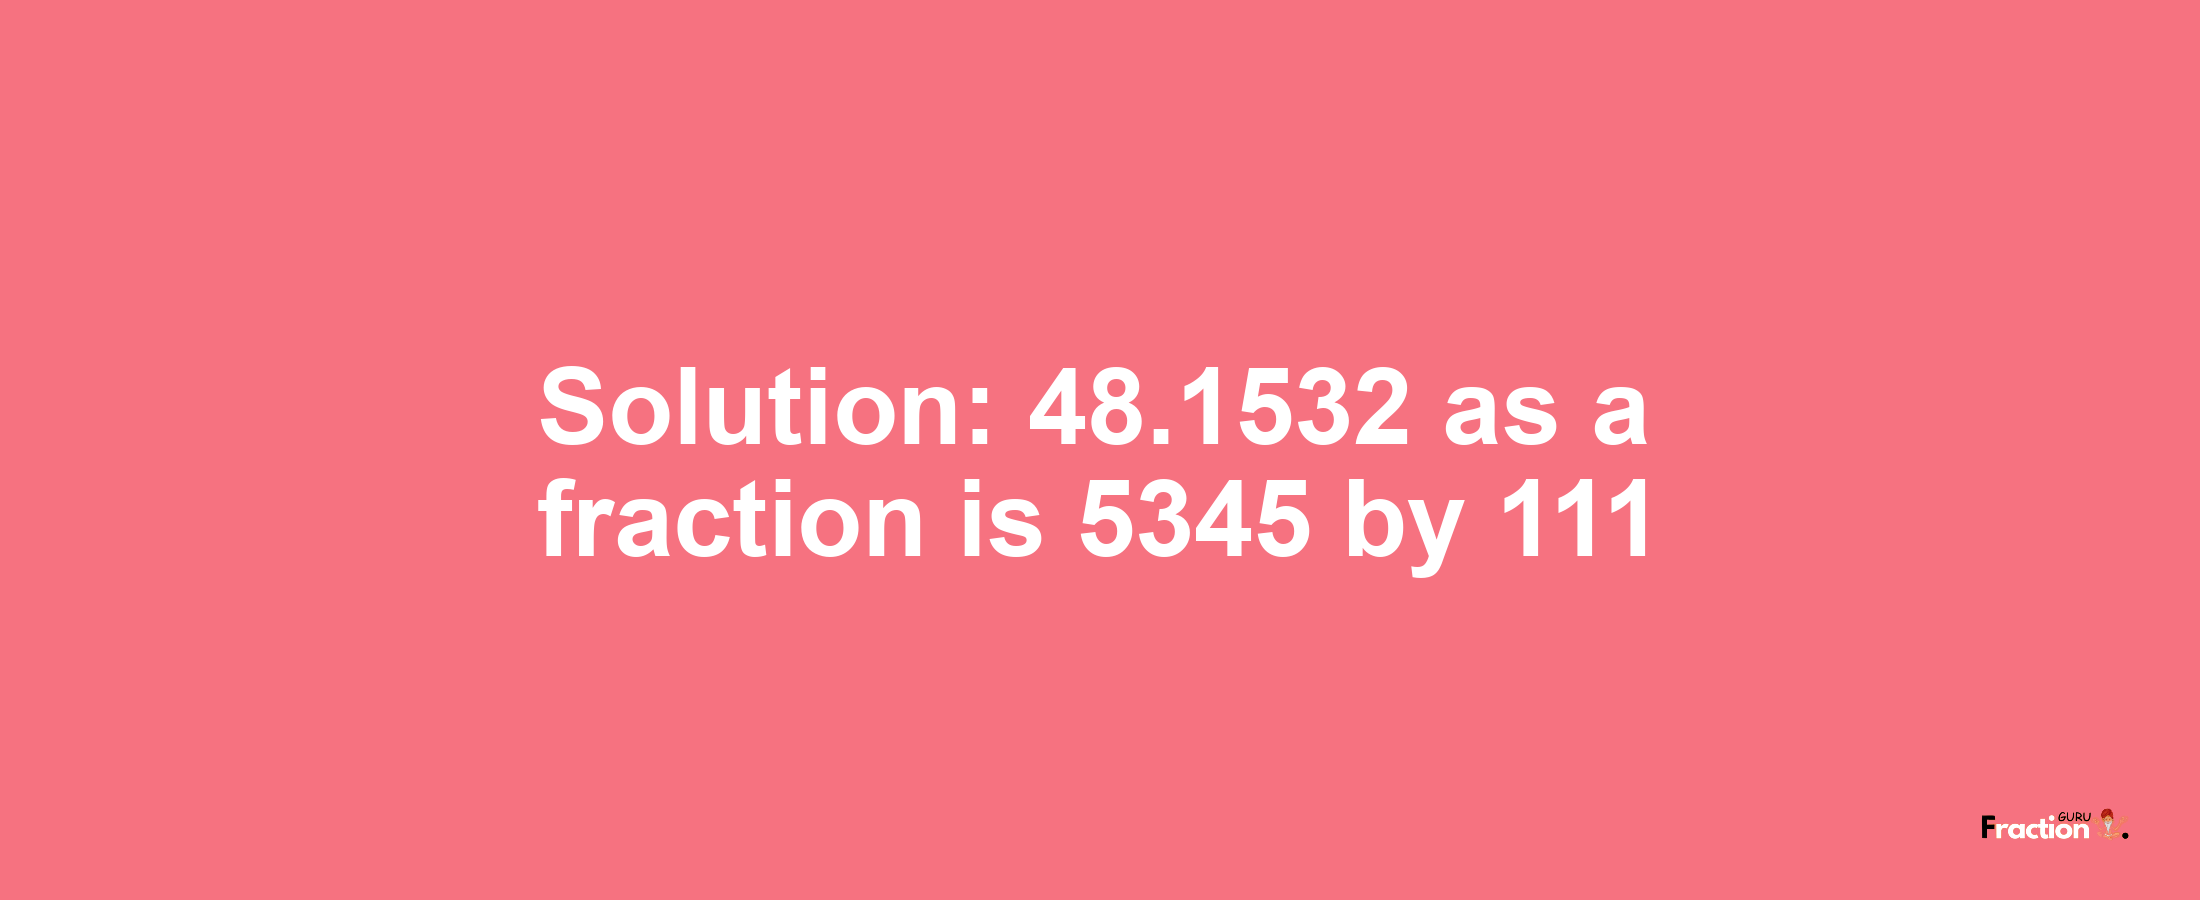 Solution:48.1532 as a fraction is 5345/111